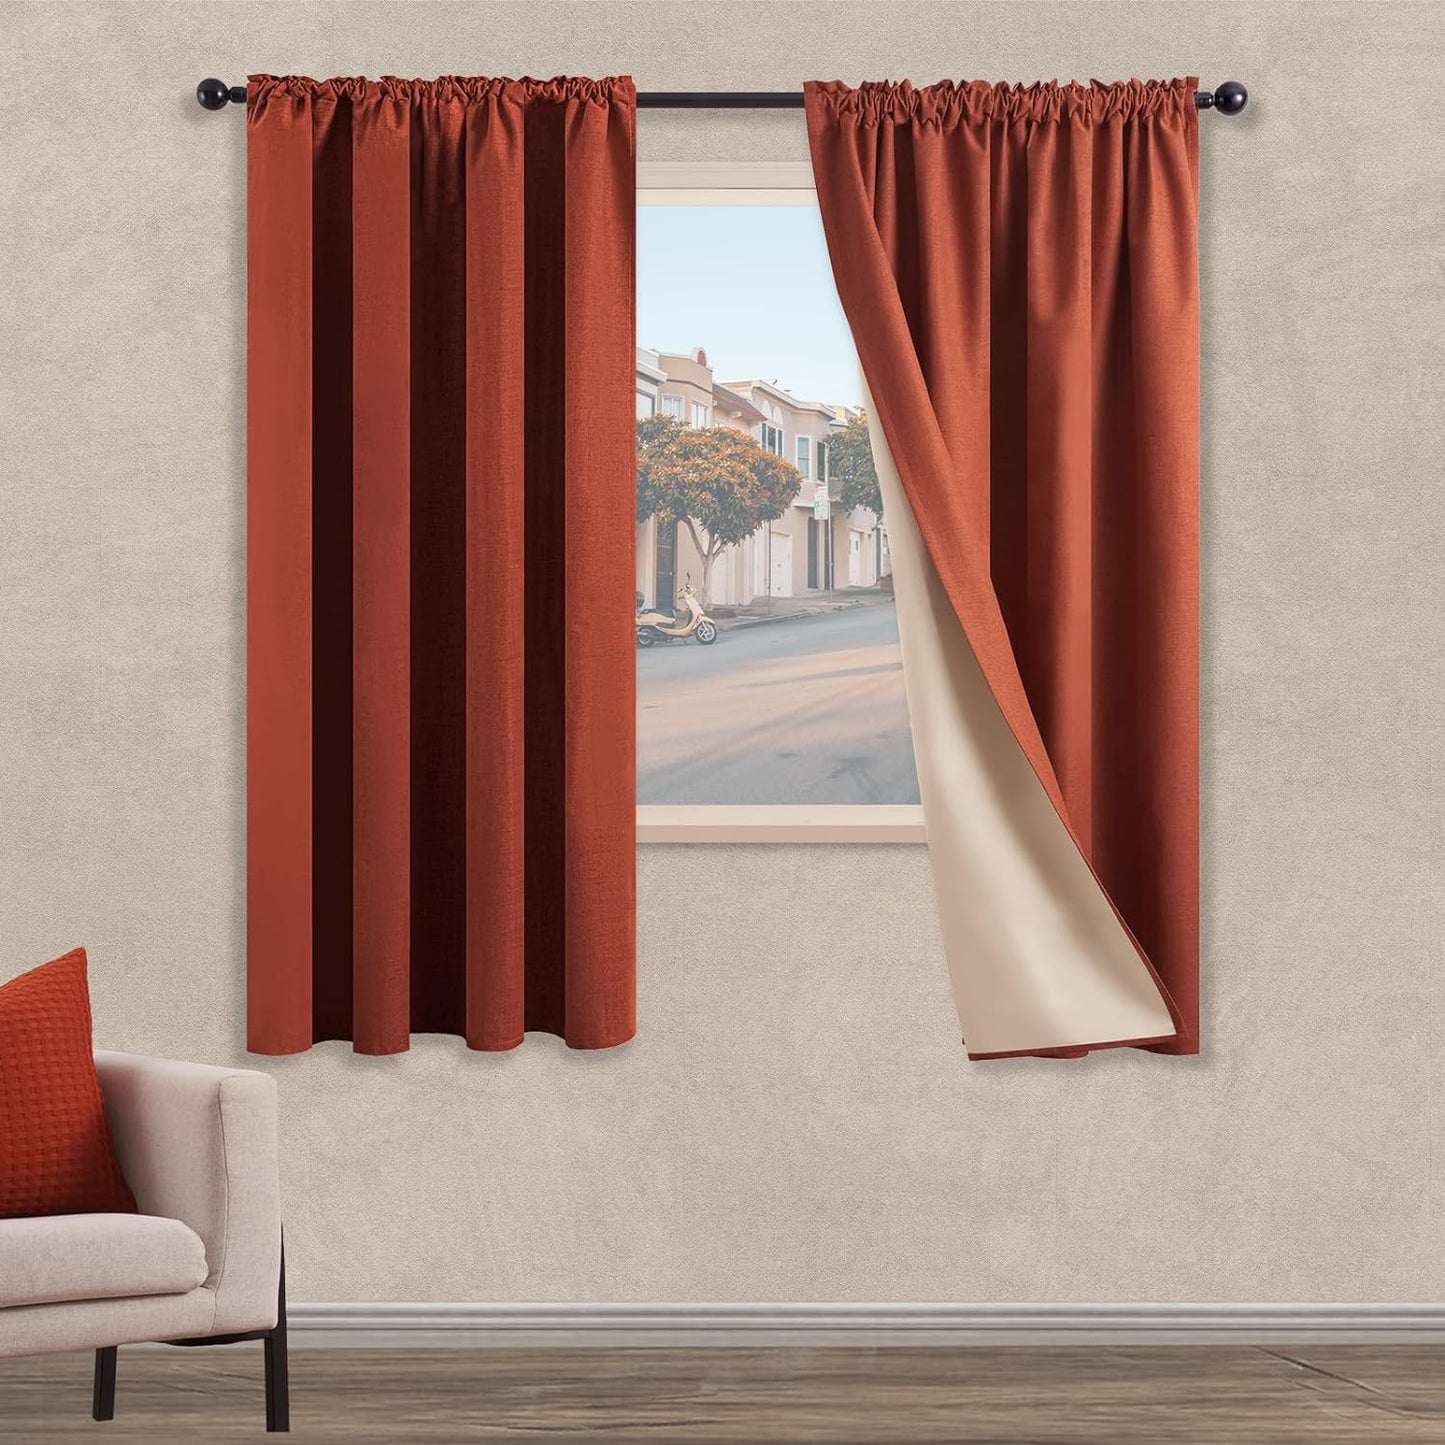 Topfinel Blackout Curtains,Linen 100% Black Out Curtains for Bedroom,Textured Thermal Insulated Window Curtains Drapes for Living Room 84 Inch Rod Pocket,Energy Efficient Curtains,2 Panels Set,Natural  Top Fine Rust 52" X 63" 